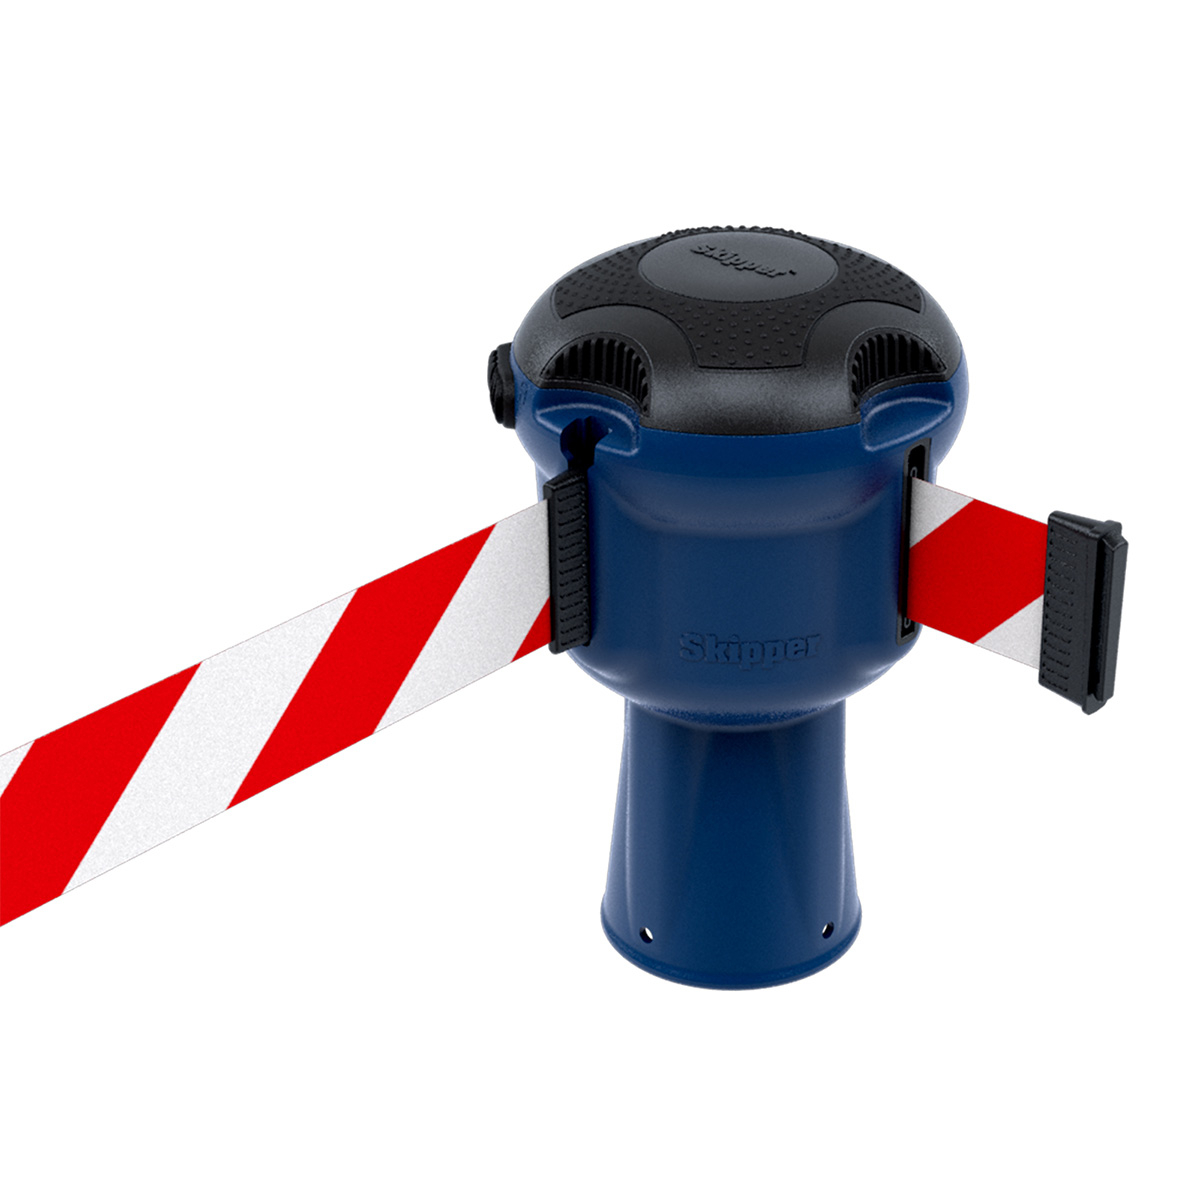 Skipper™ Retractable Safety Barrier With Blue Unit And Red White Chevron Tape